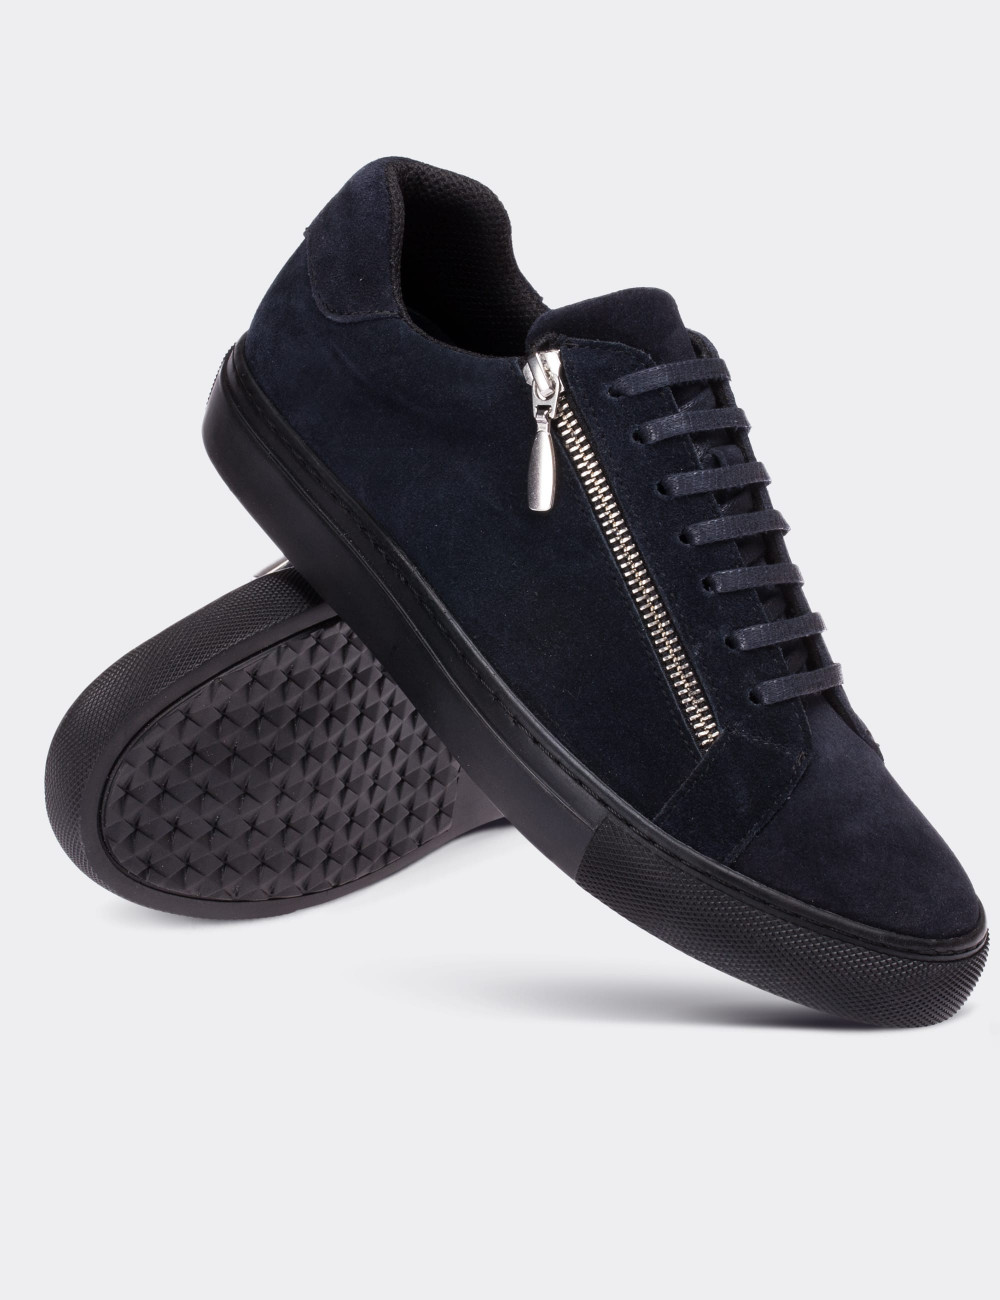 Navy Suede Leather Sneakers - 01741MLCVC01